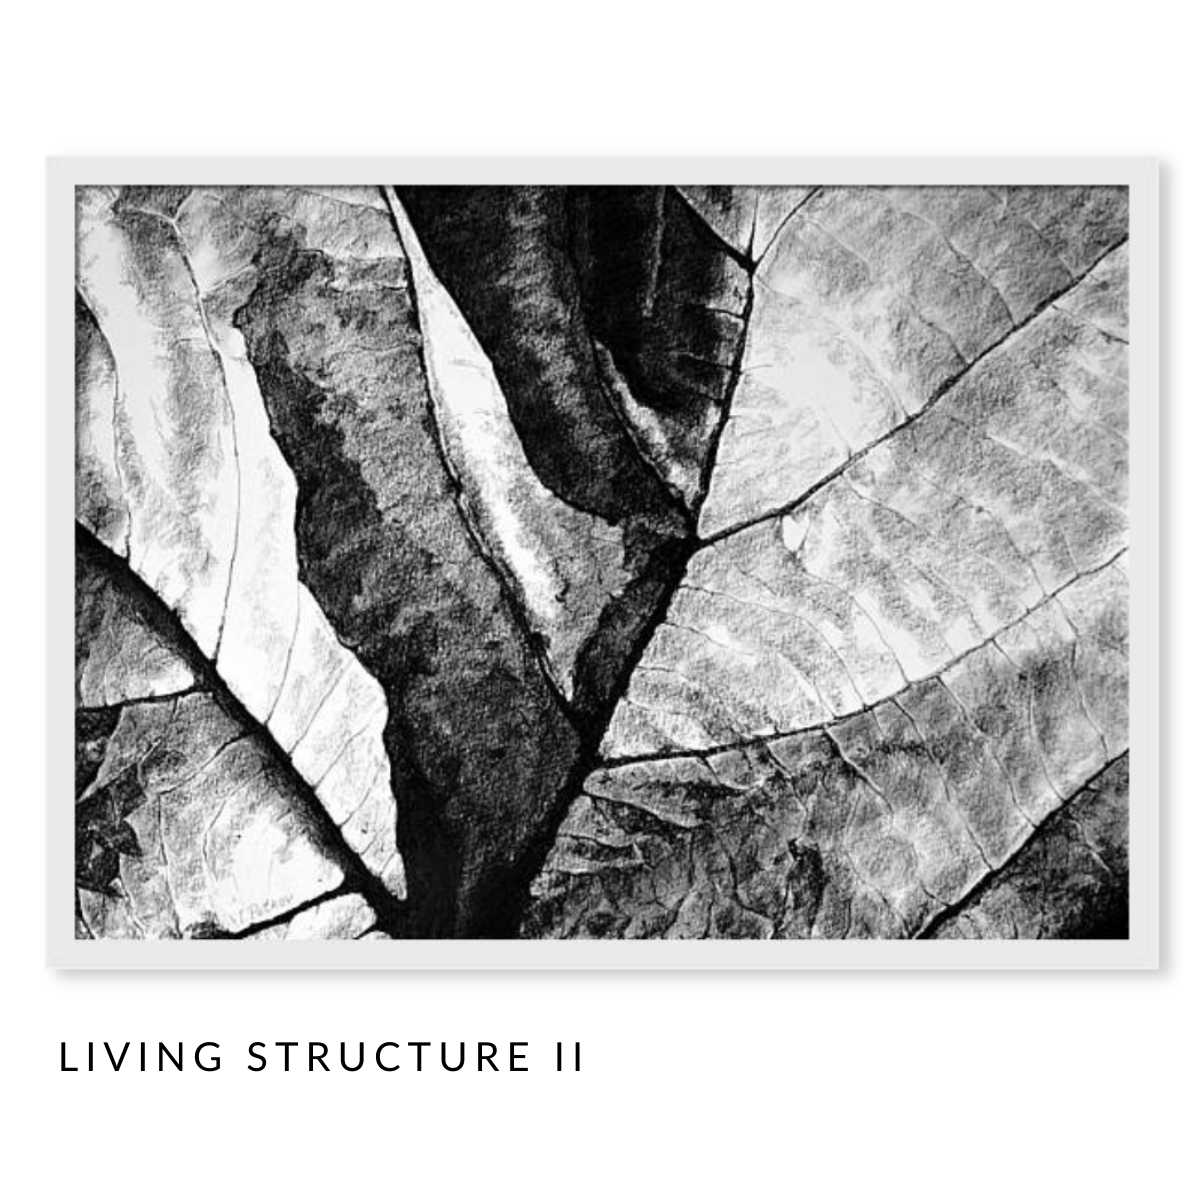 Living Structure Art Series - Set of 3 Black and White Pastel Drawings